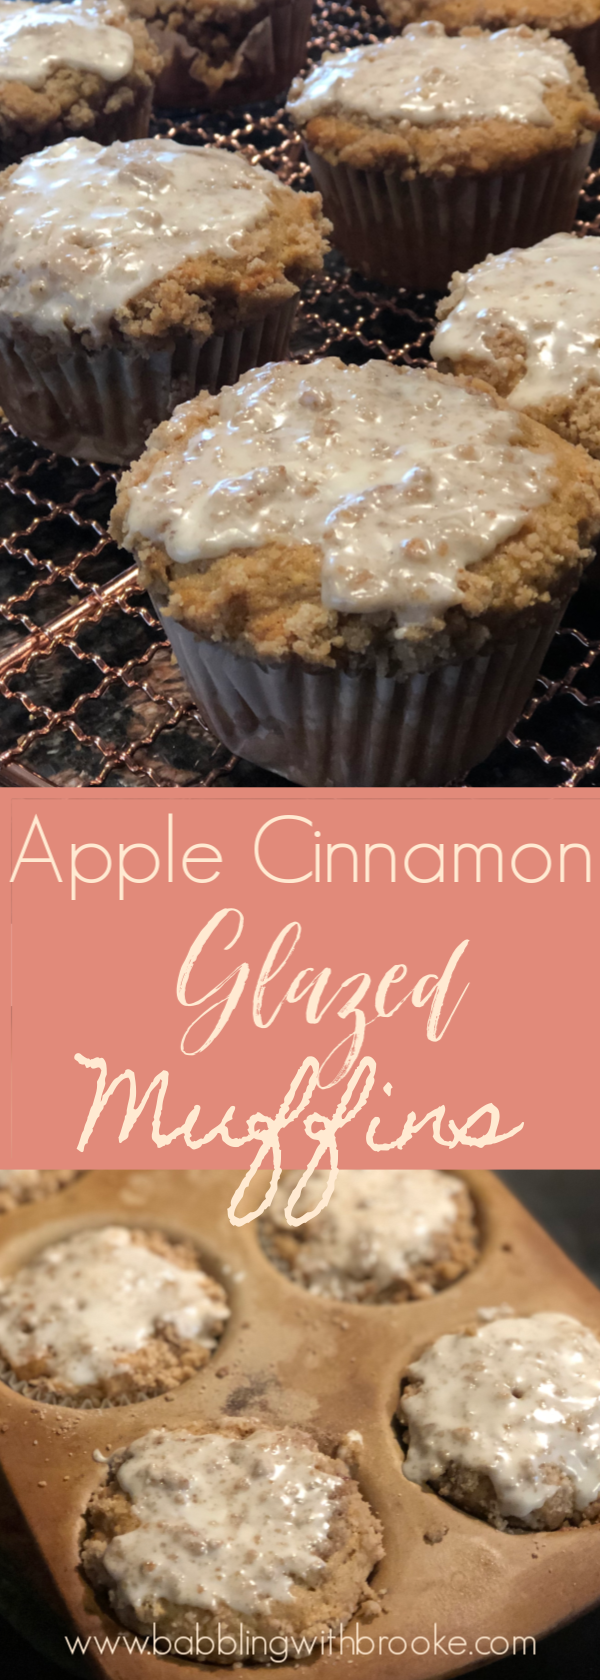 These apple cinnamon glazed muffins are so good! These muffins are easy to make and the perfect sweet treat to start your morning. These apple muffins are perfect for Fall or Winter with the sweet cinnamon apple combination. #applemuffins #easymuffinrecipe #sweetbreakfastrecipe #sweettreat #muffins #Fallmuffins #Wintermuffin #muffinrecipes